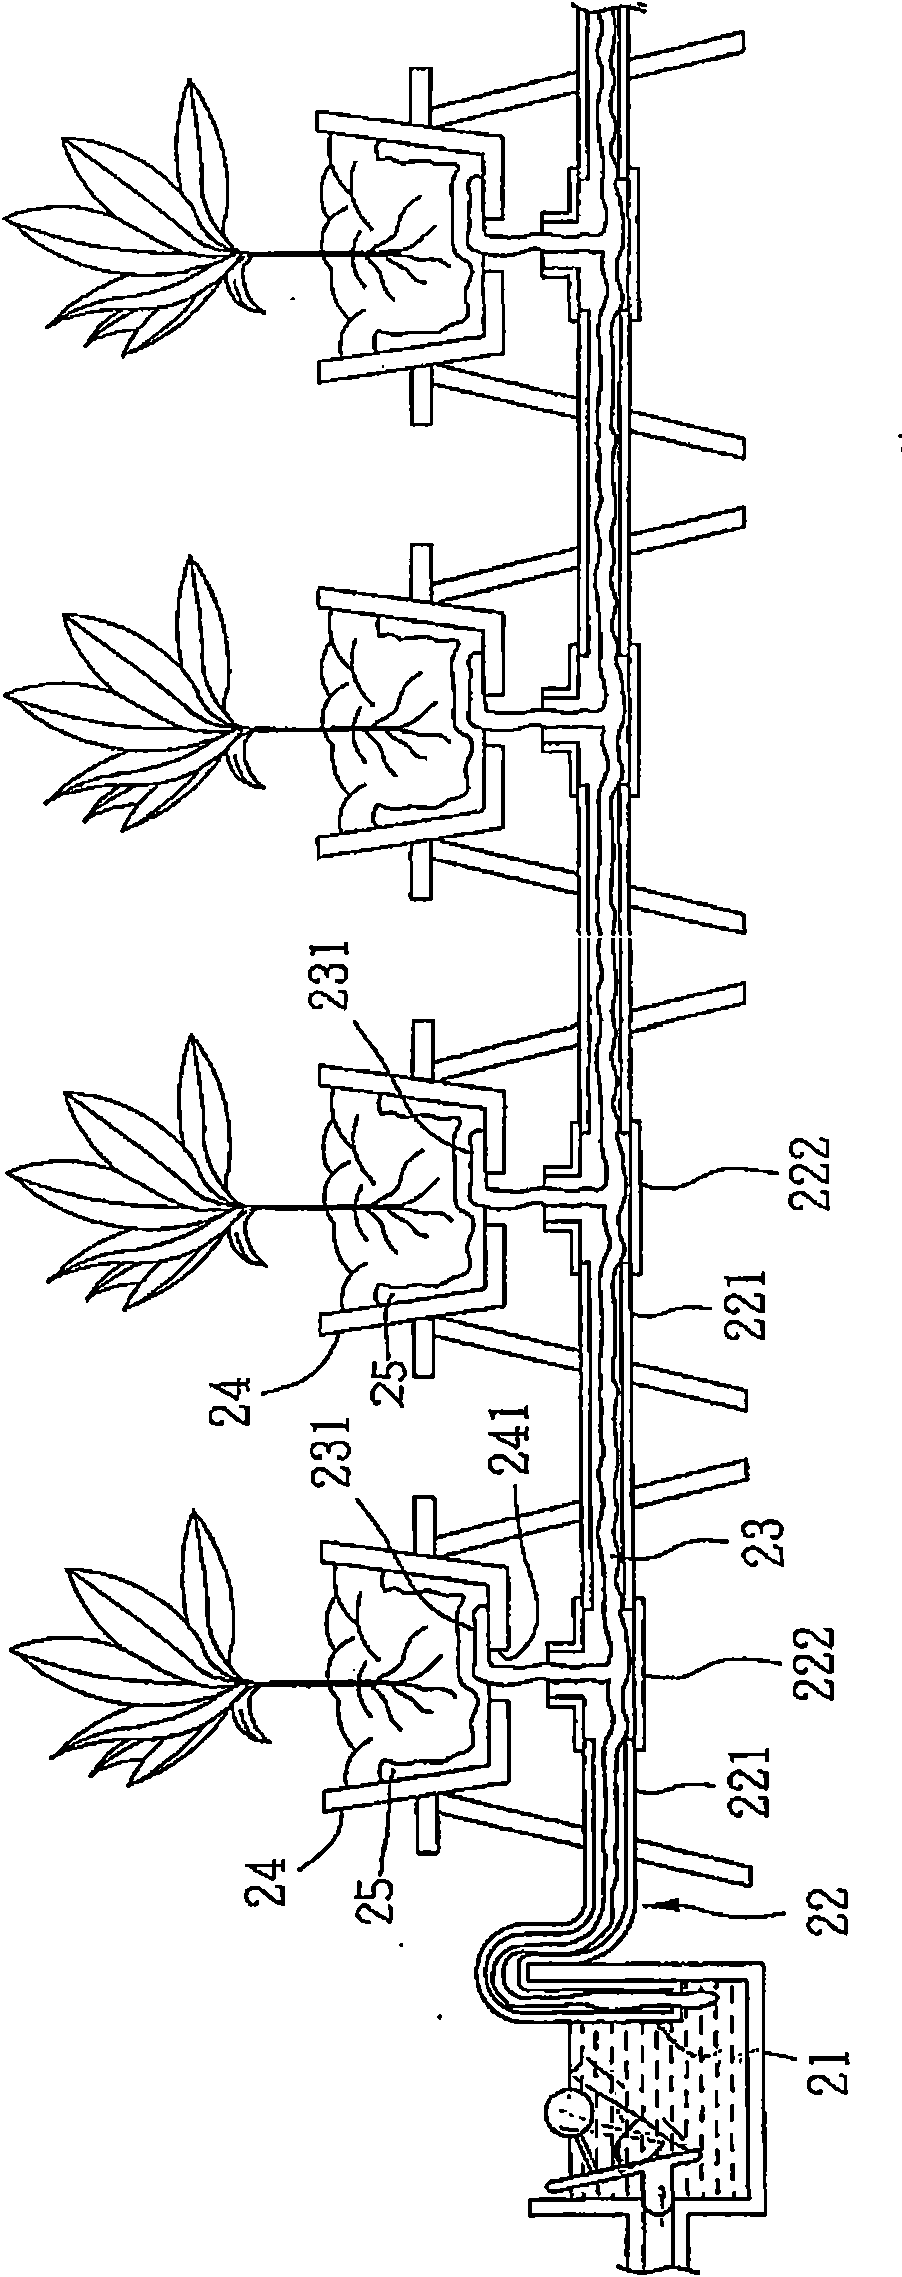 Active potted plant water supply device